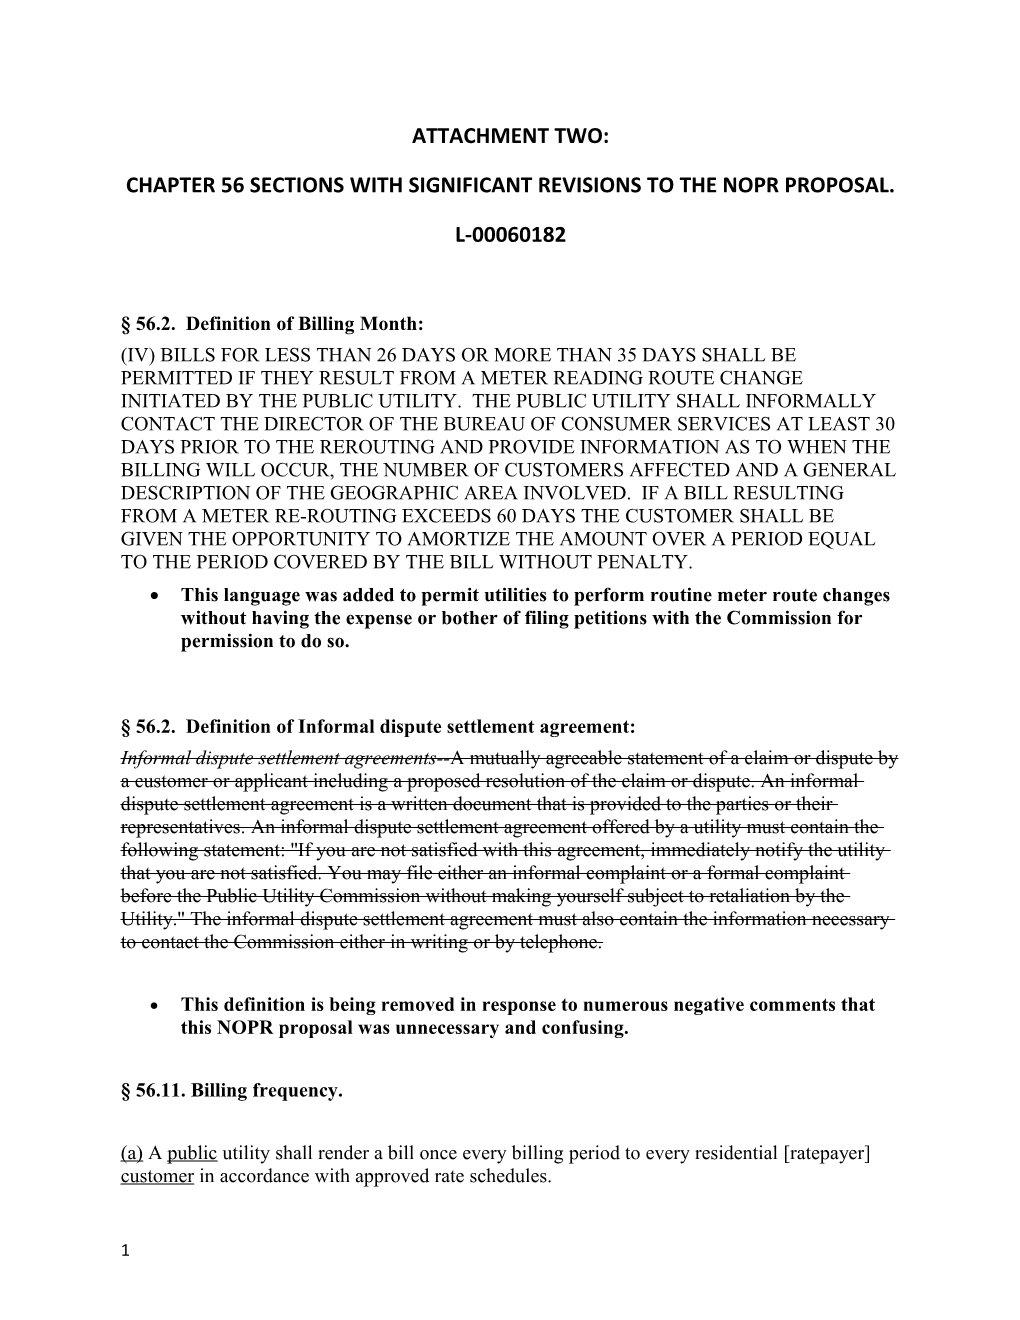 Chapter 56 Sections with Significant Revisionsto the Nopr Proposal